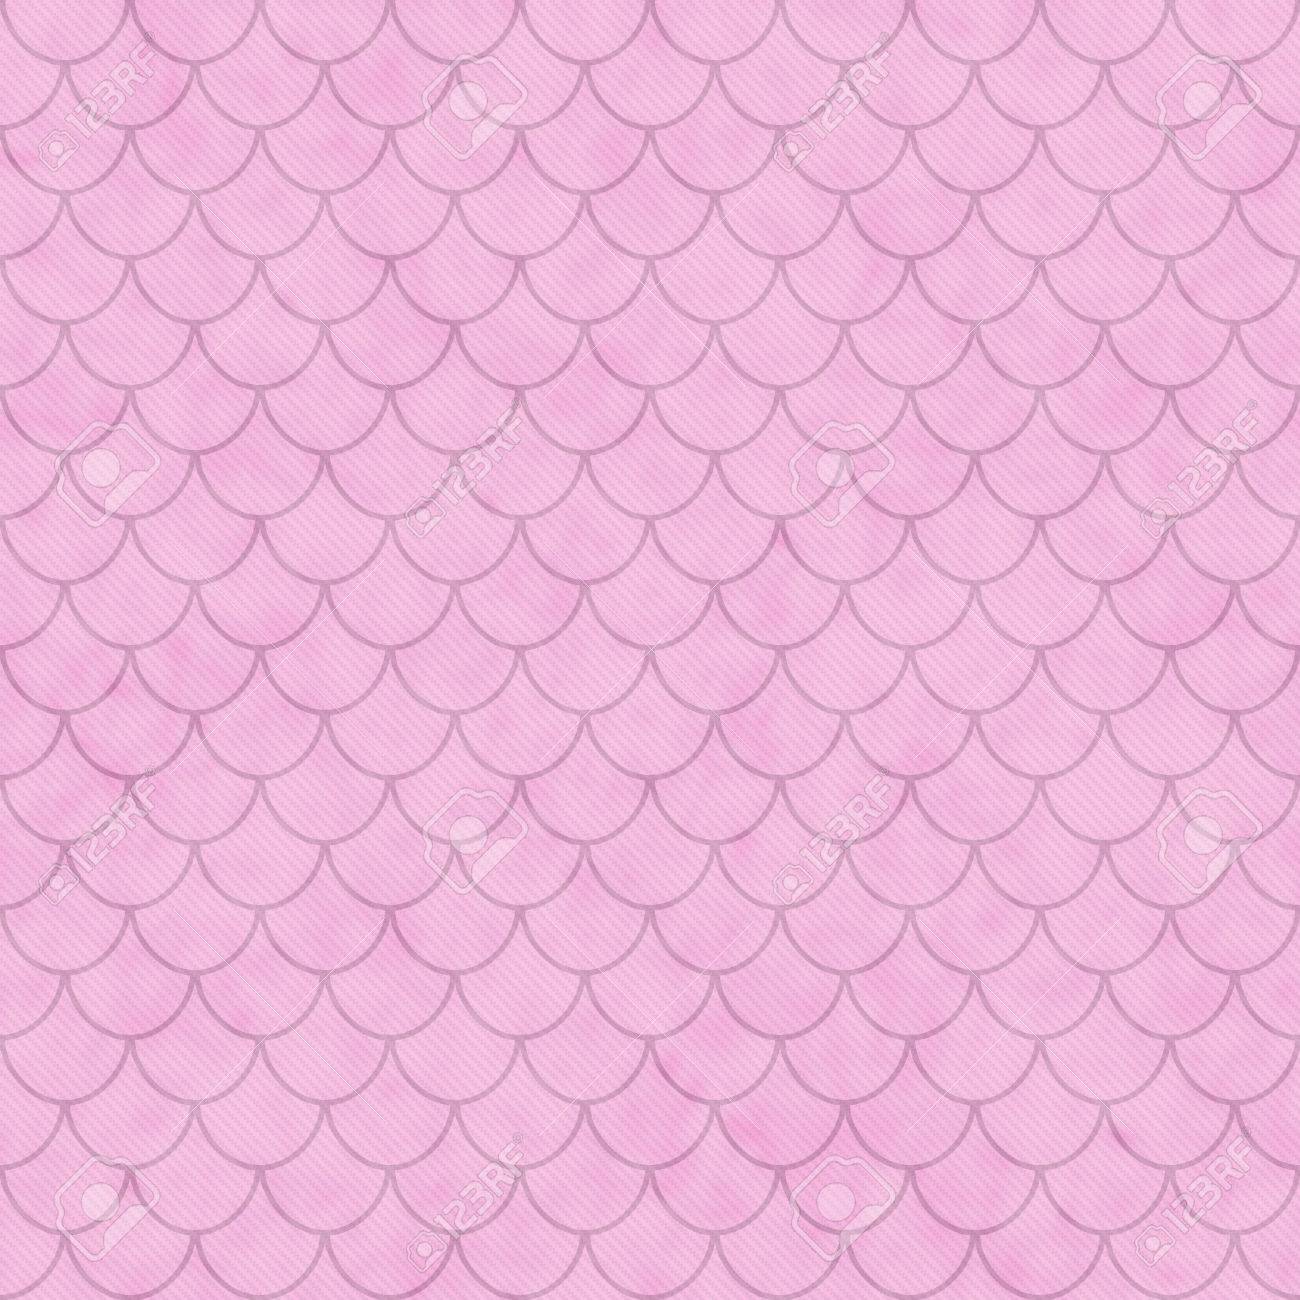 Pink Shell Tiles Pattern Repeat Background That Is Seamless And